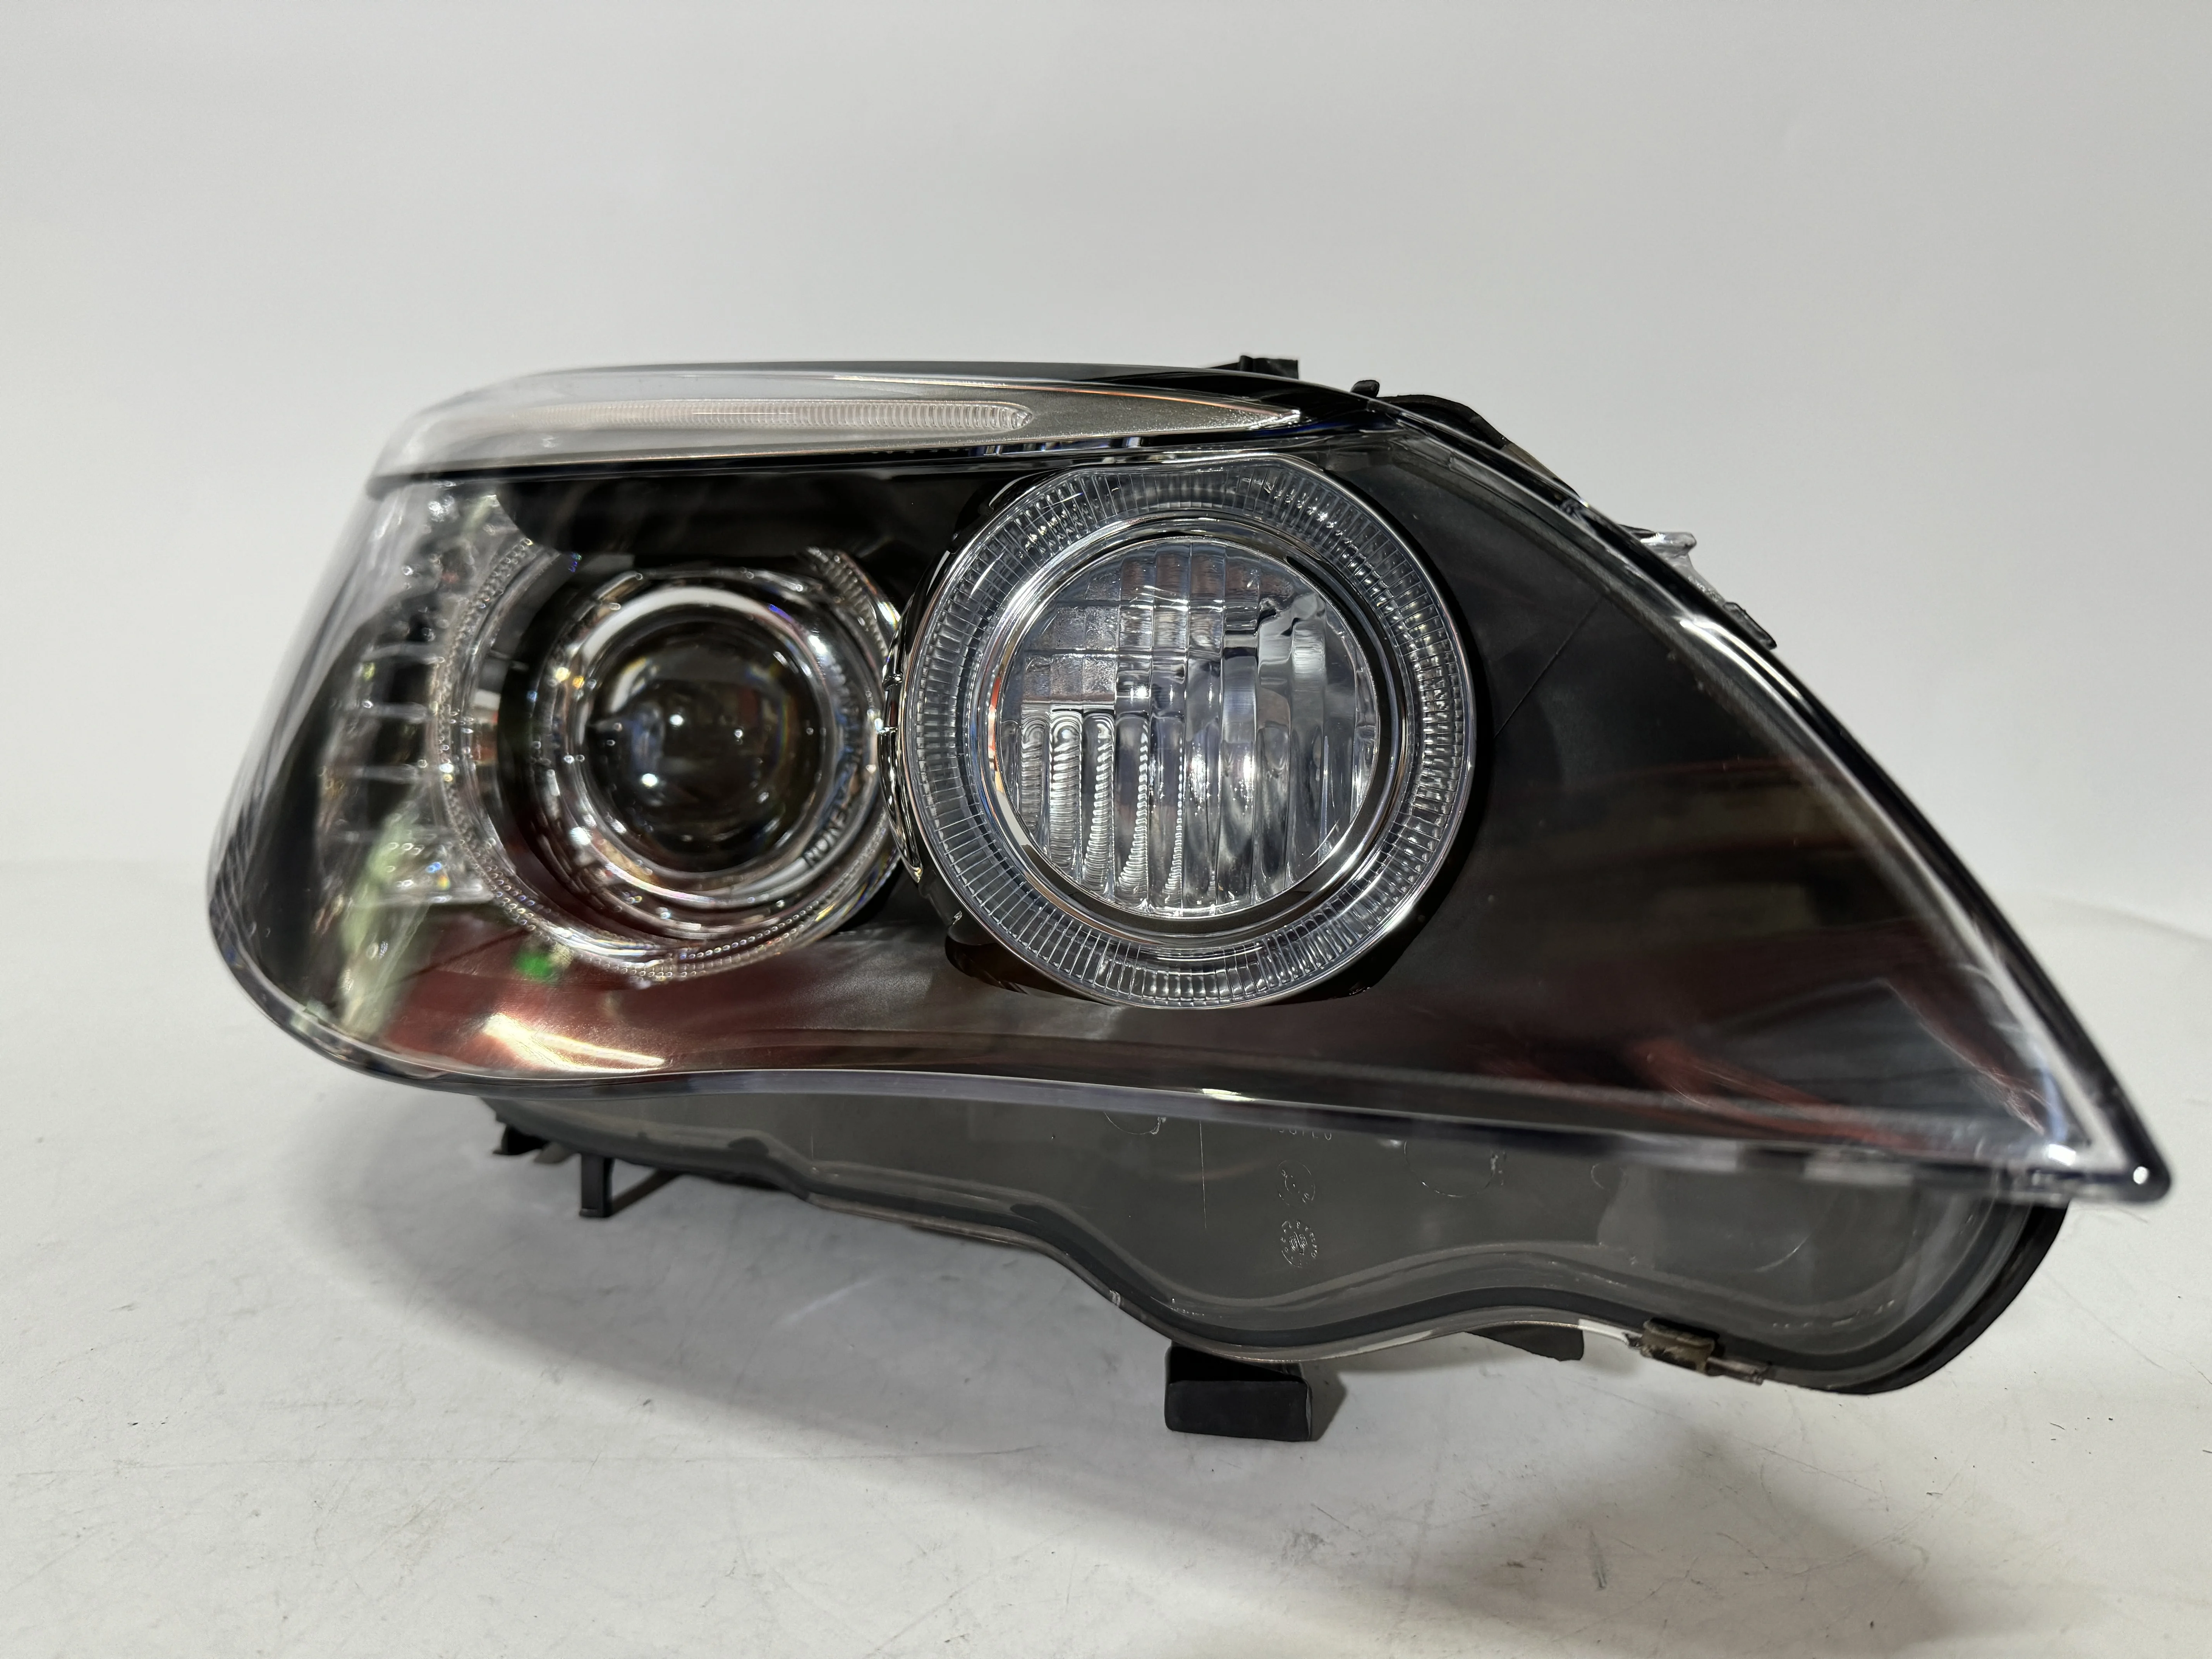 Fit For BMW 5 Headlight 2008-2010 BMW E60 Headlight Xenon Headlamps AFS And Without AFS Plug And Play Upgrade And Modification